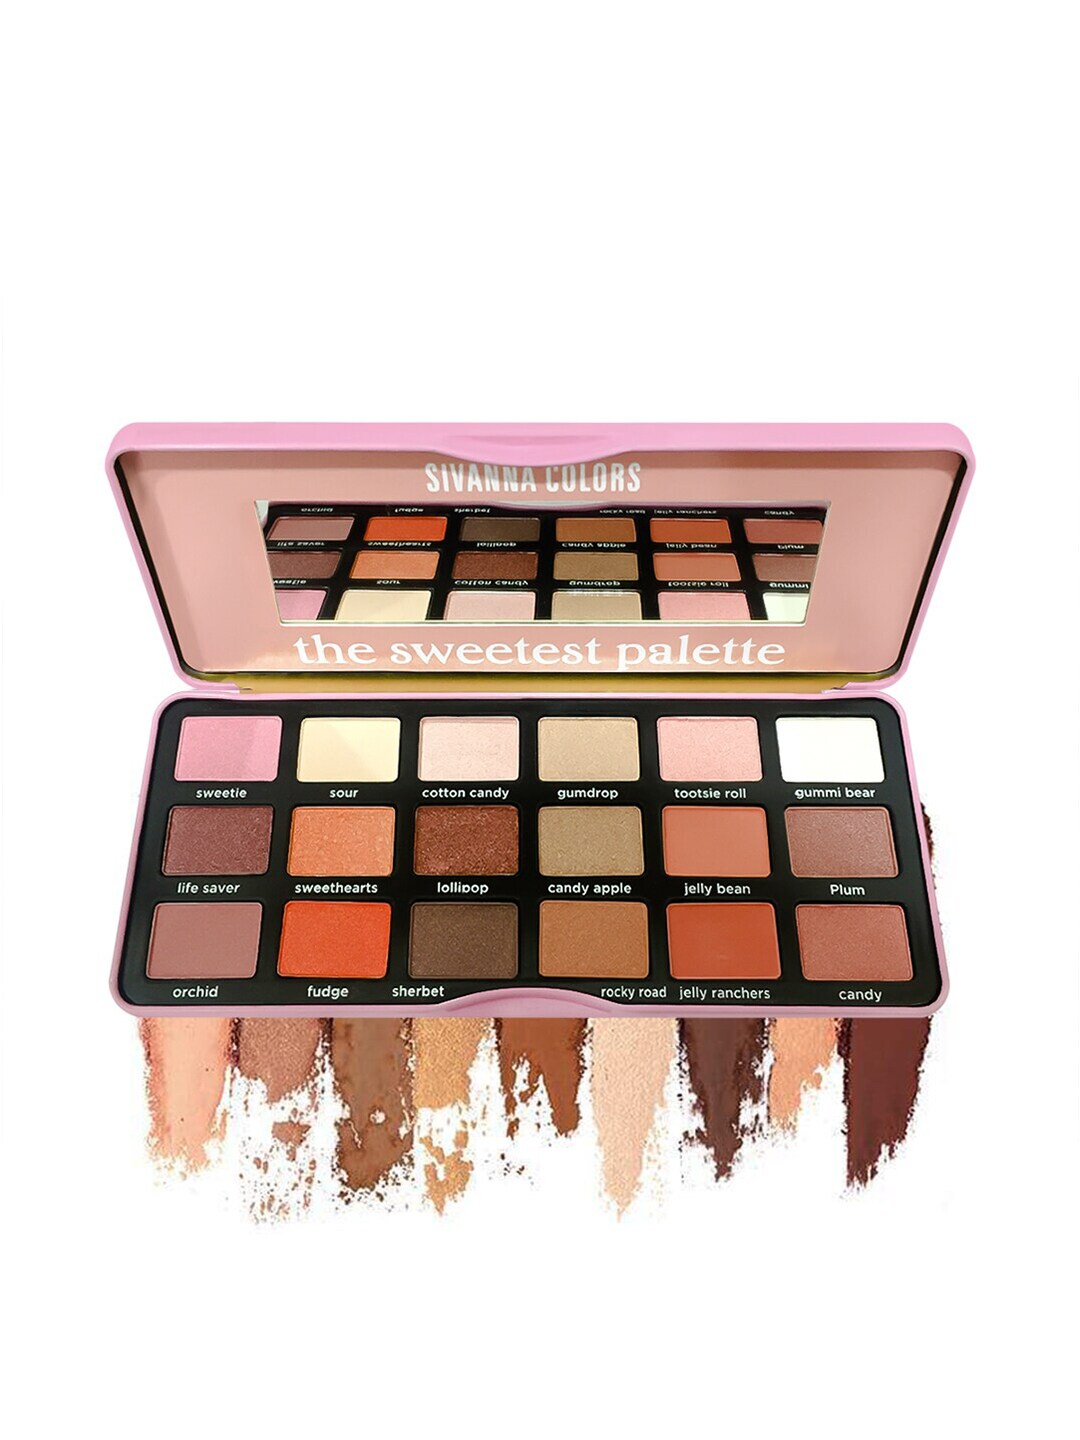 Sivanna Colors The Sweetest Palette Pressed Powder Matte Eyeshadow - HF7006 02 Price in India